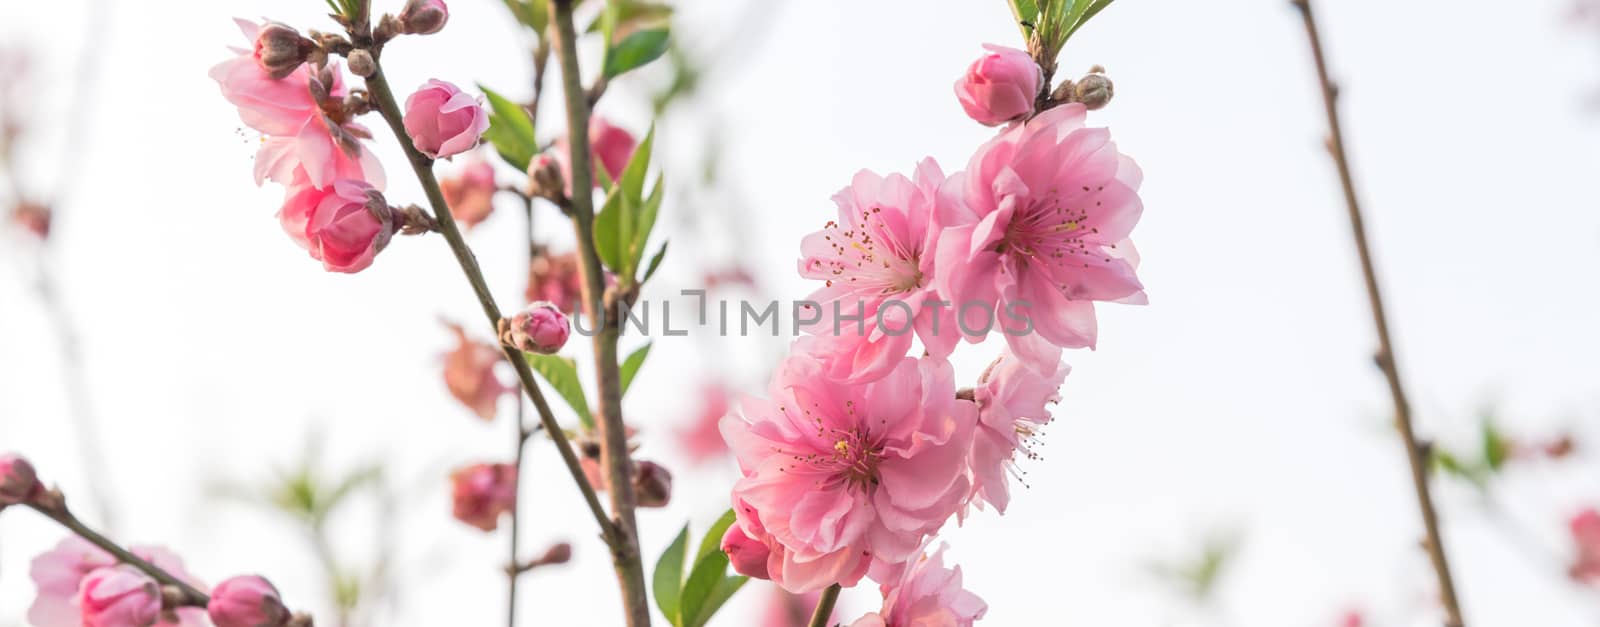 Panorama springtime background of peach flower blossom isolated on white. This is ornament trees for Vietnamese Lunar New Year Tet in springtime.